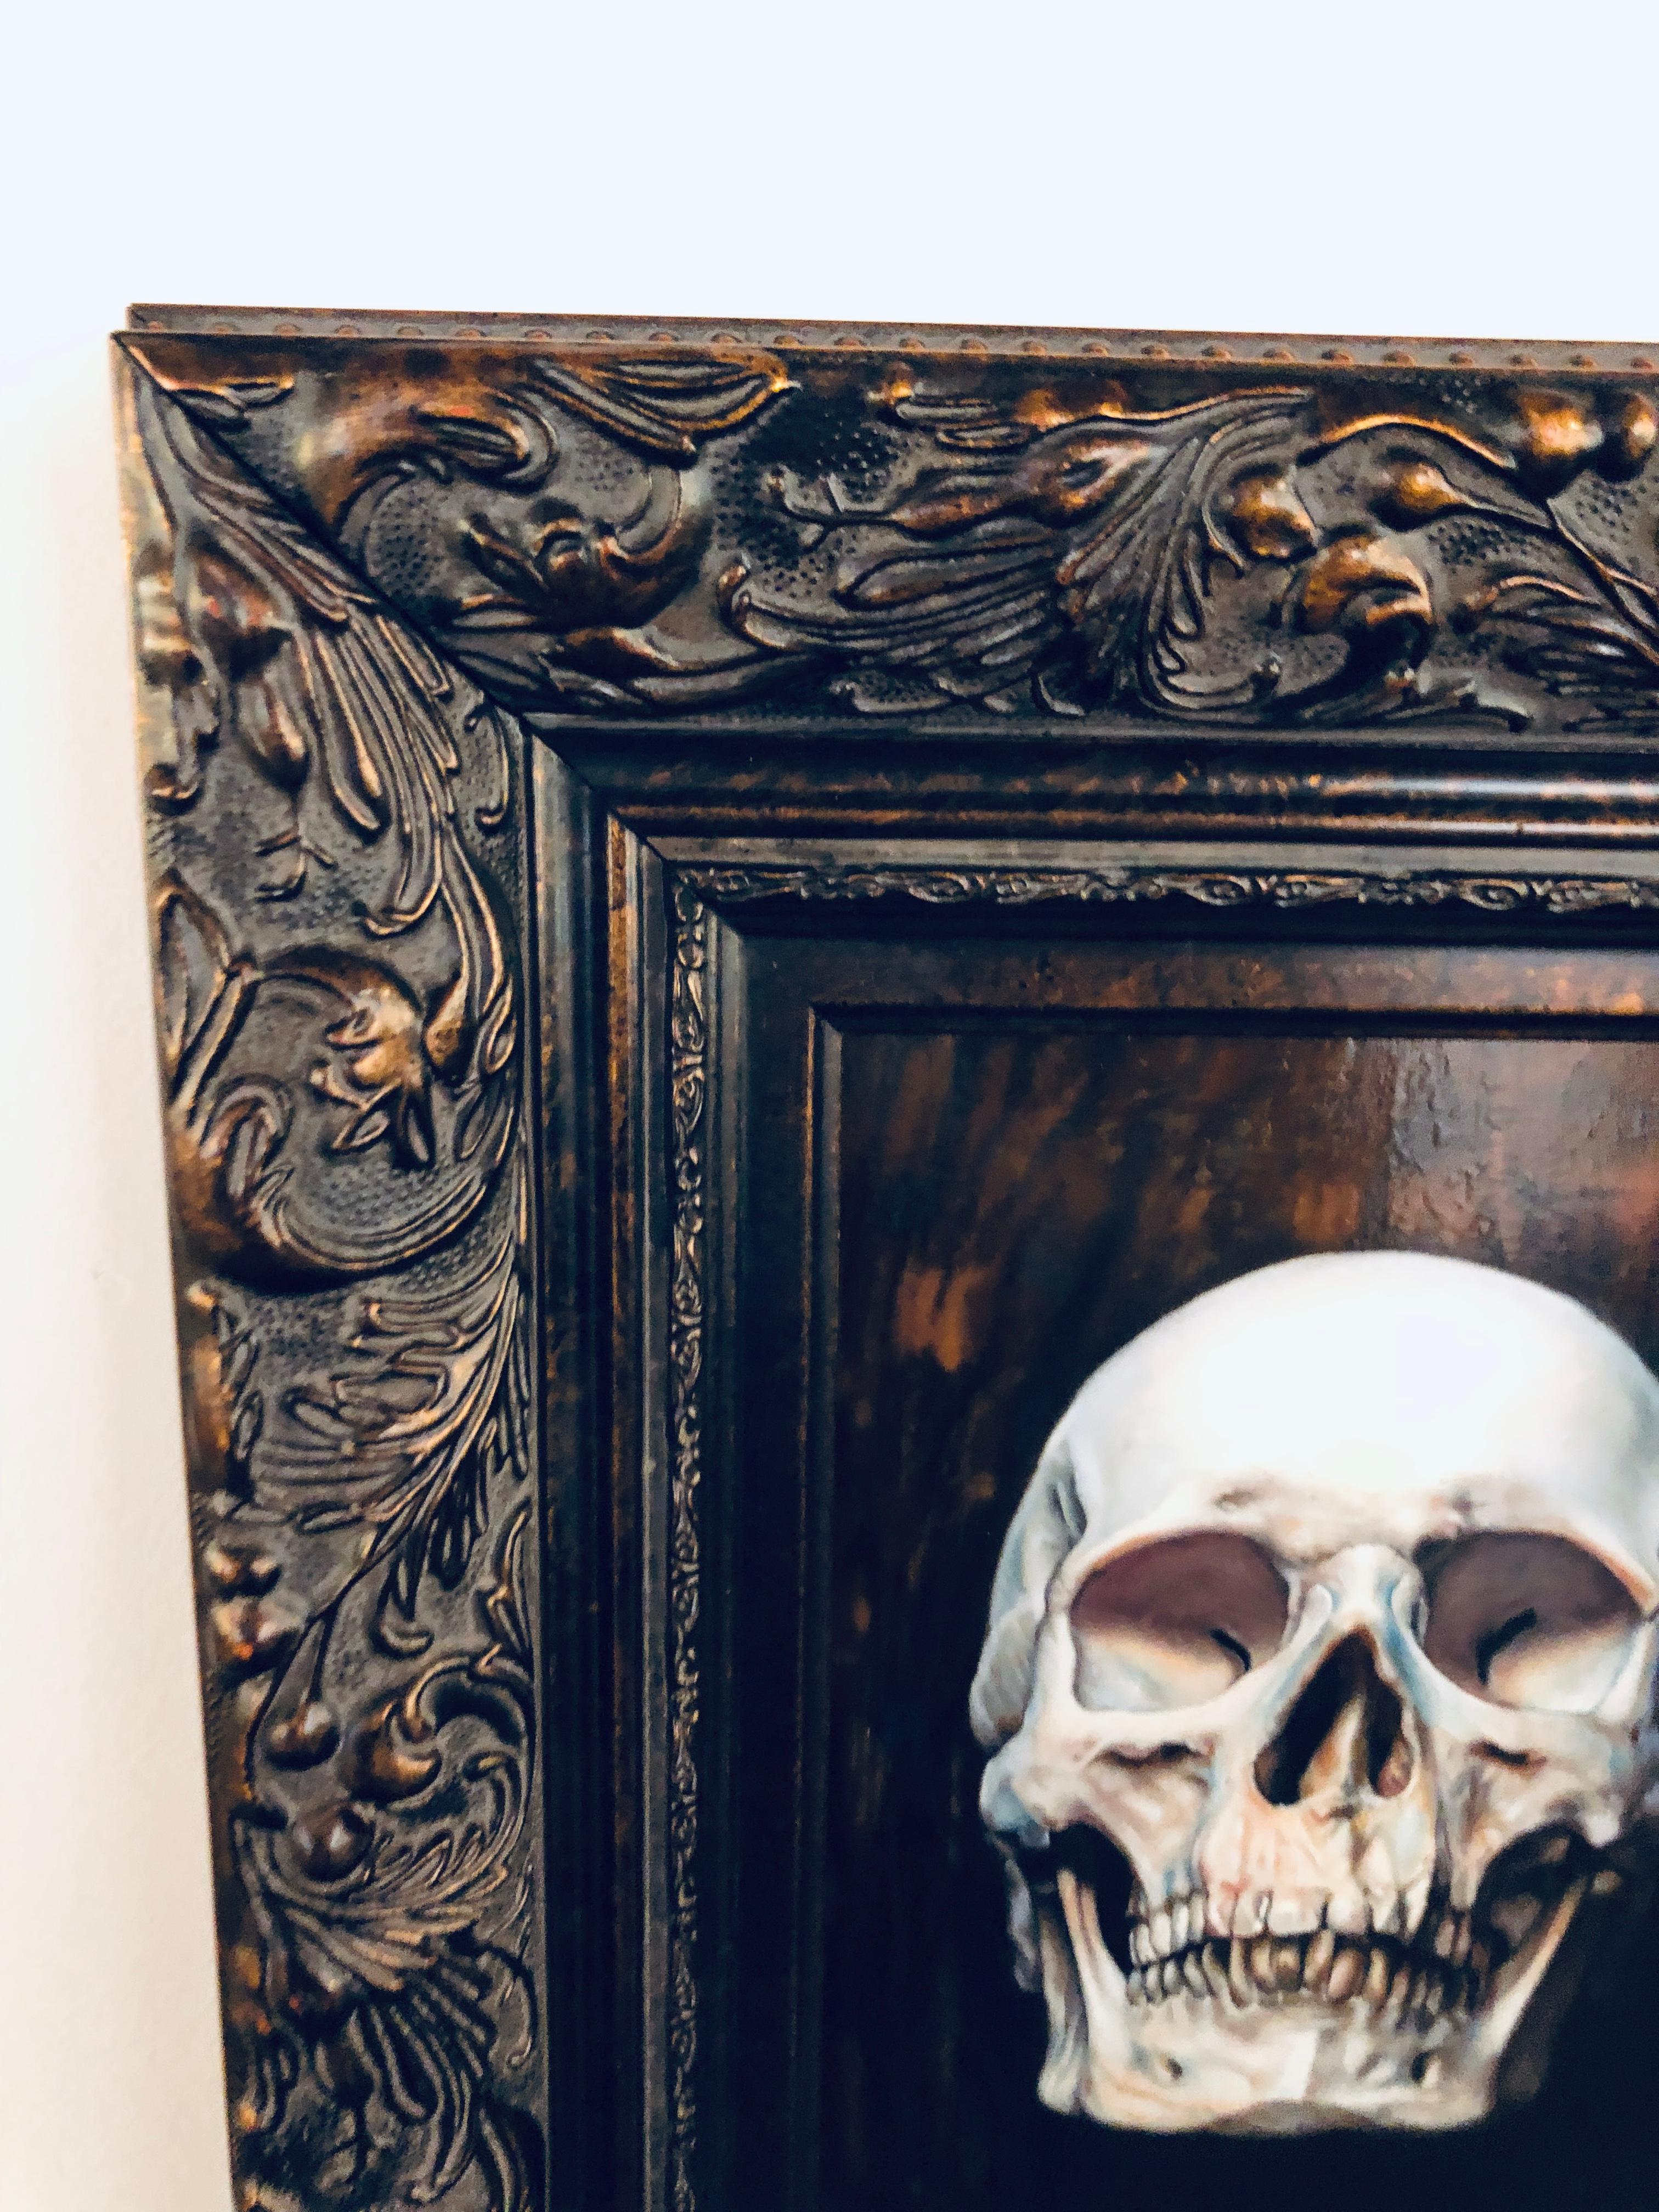 Vanitas - Original Oil Painting of a Human Skull in 17th Century Dutch Style - Black Figurative Painting by Matthew Cook